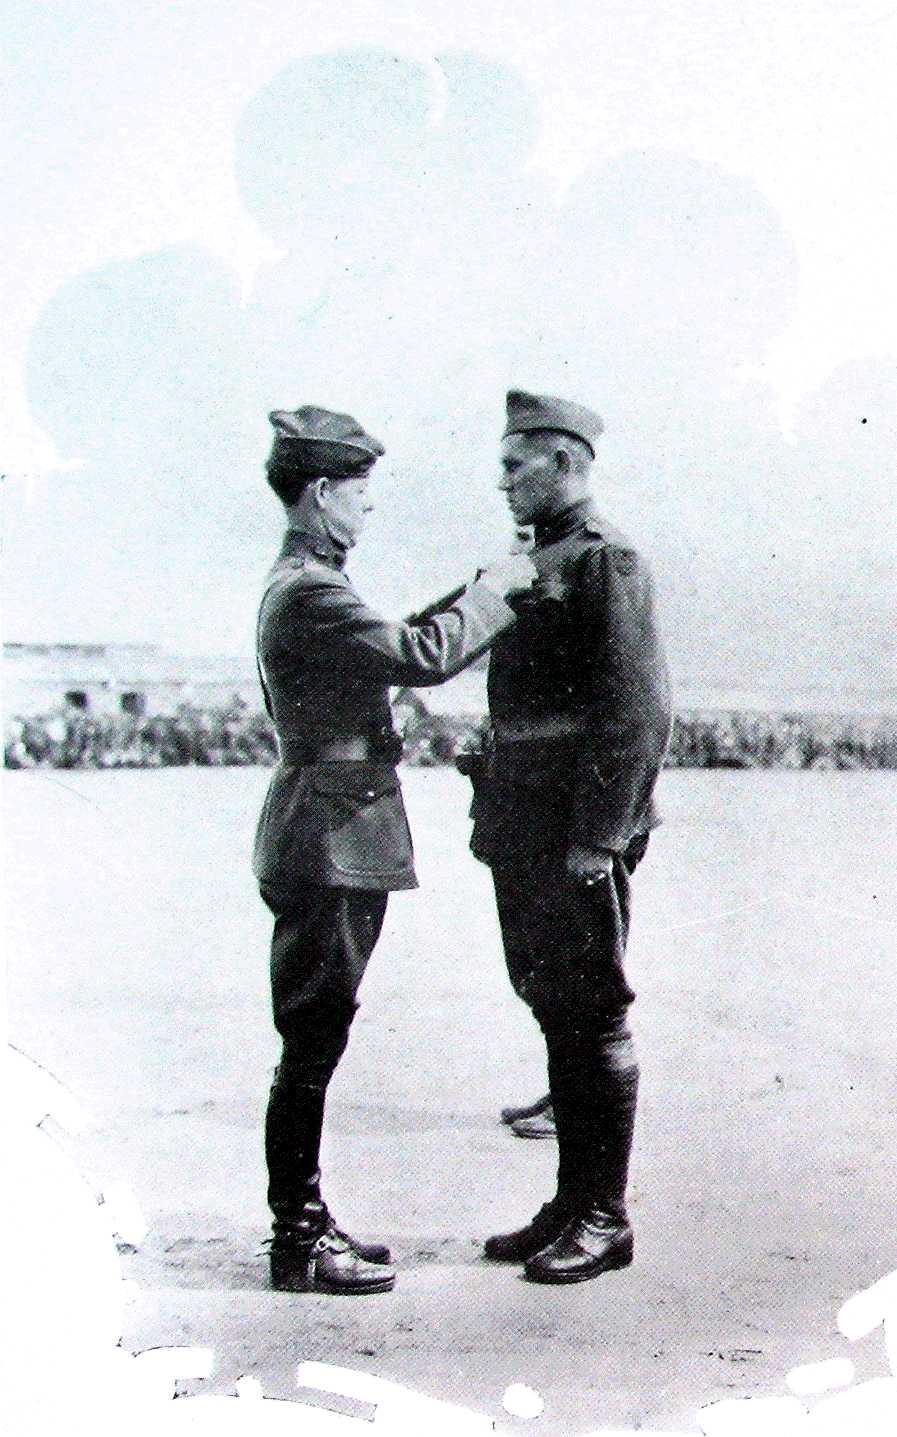 SGT. 1Cl. JAKE C. SARTAIN RECEIVES D. S. C. The picture above shows Colonel W. H. Sage, Jr., 315th Engineers, awarding Distinguished Service Cross to Sgt. 1Cl. Jake C. Sartain at St.